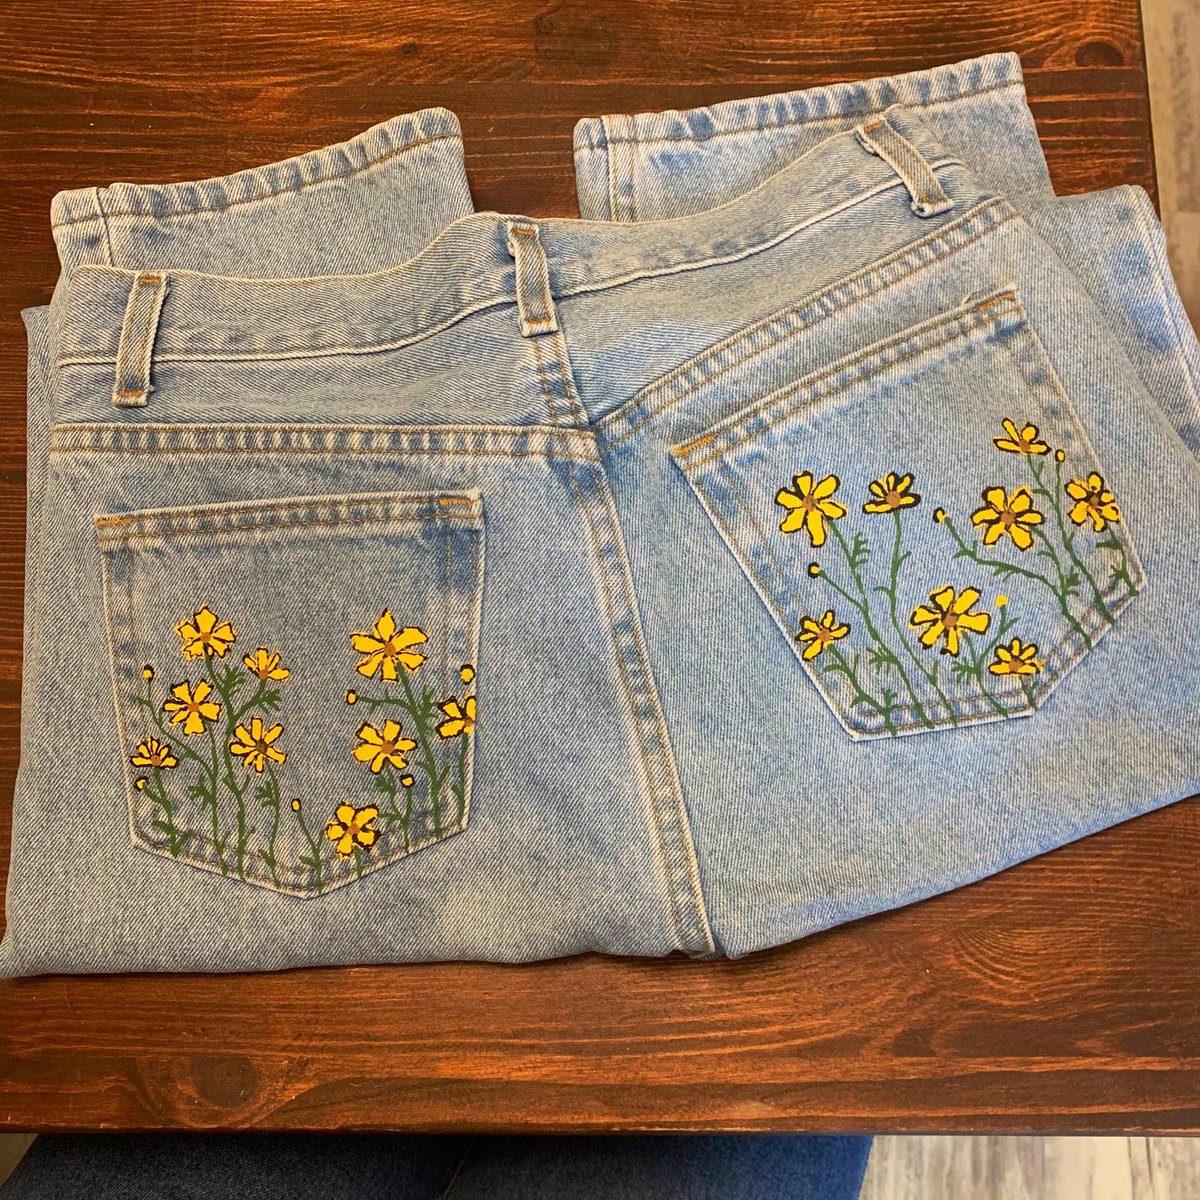 These pretty babies are for a custom order! I’m in love 